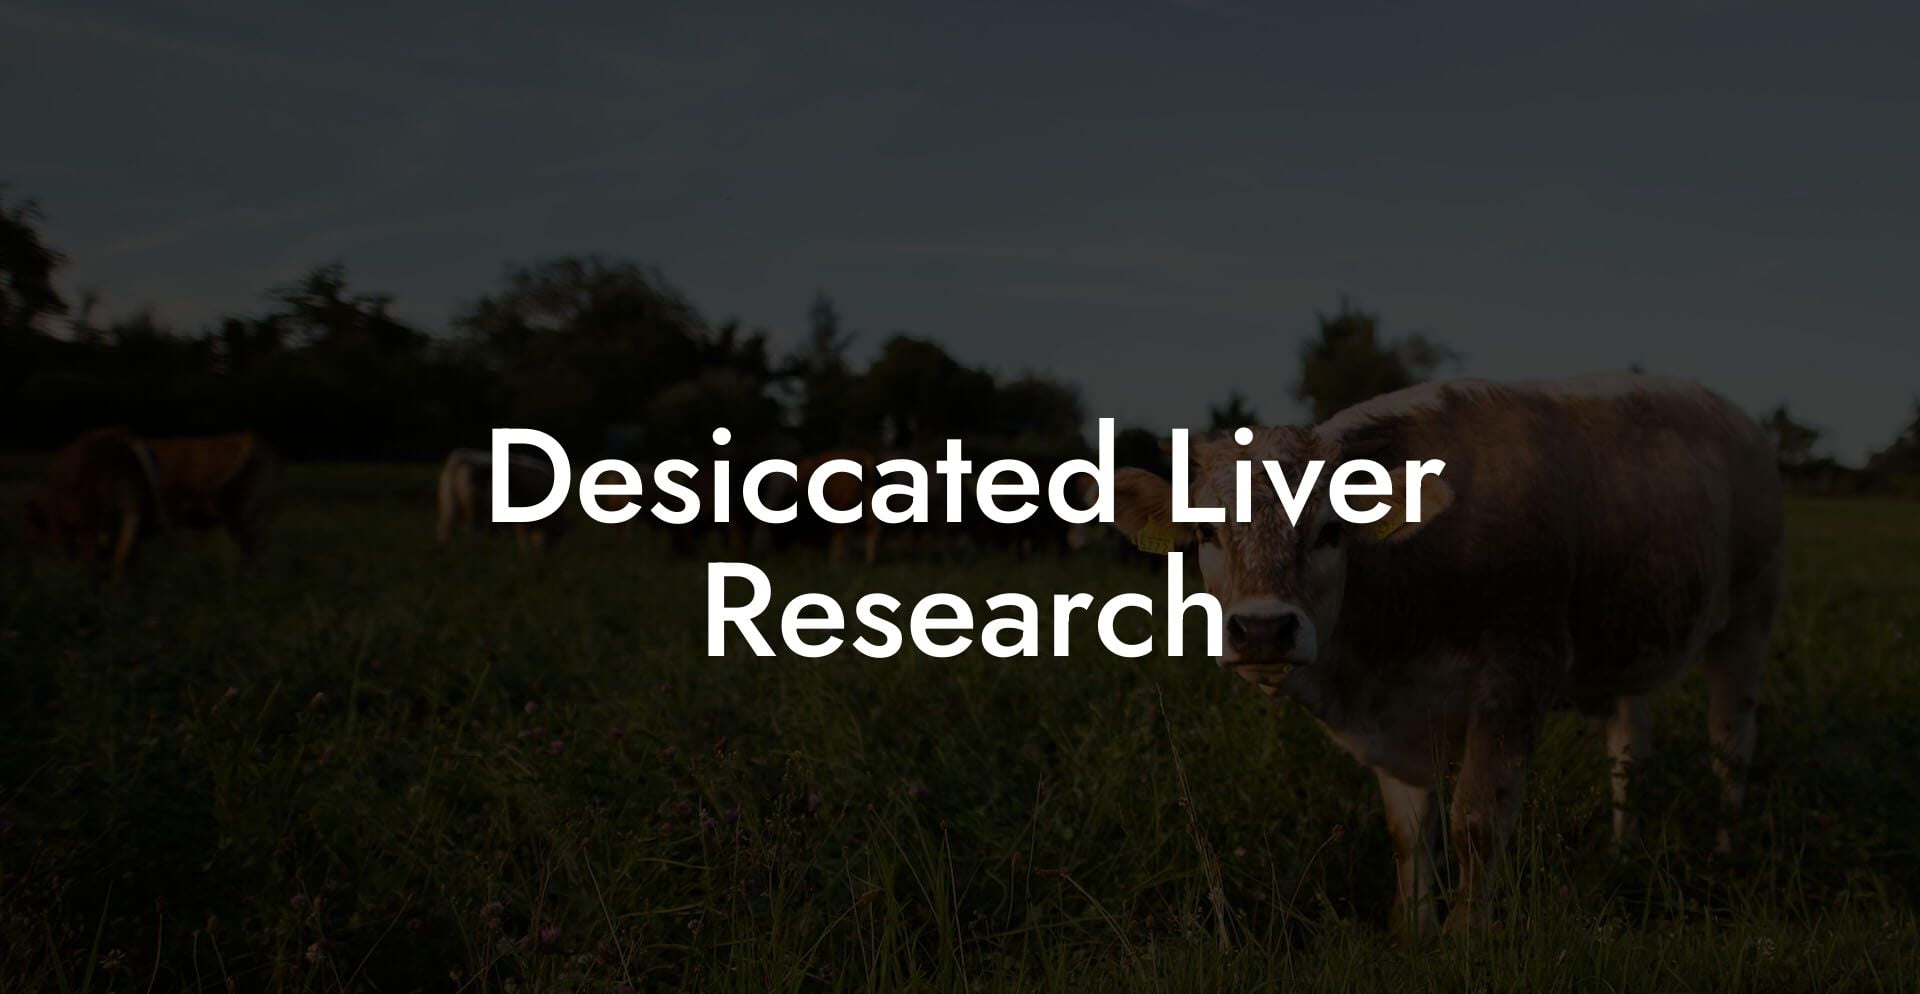 Desiccated Liver Research